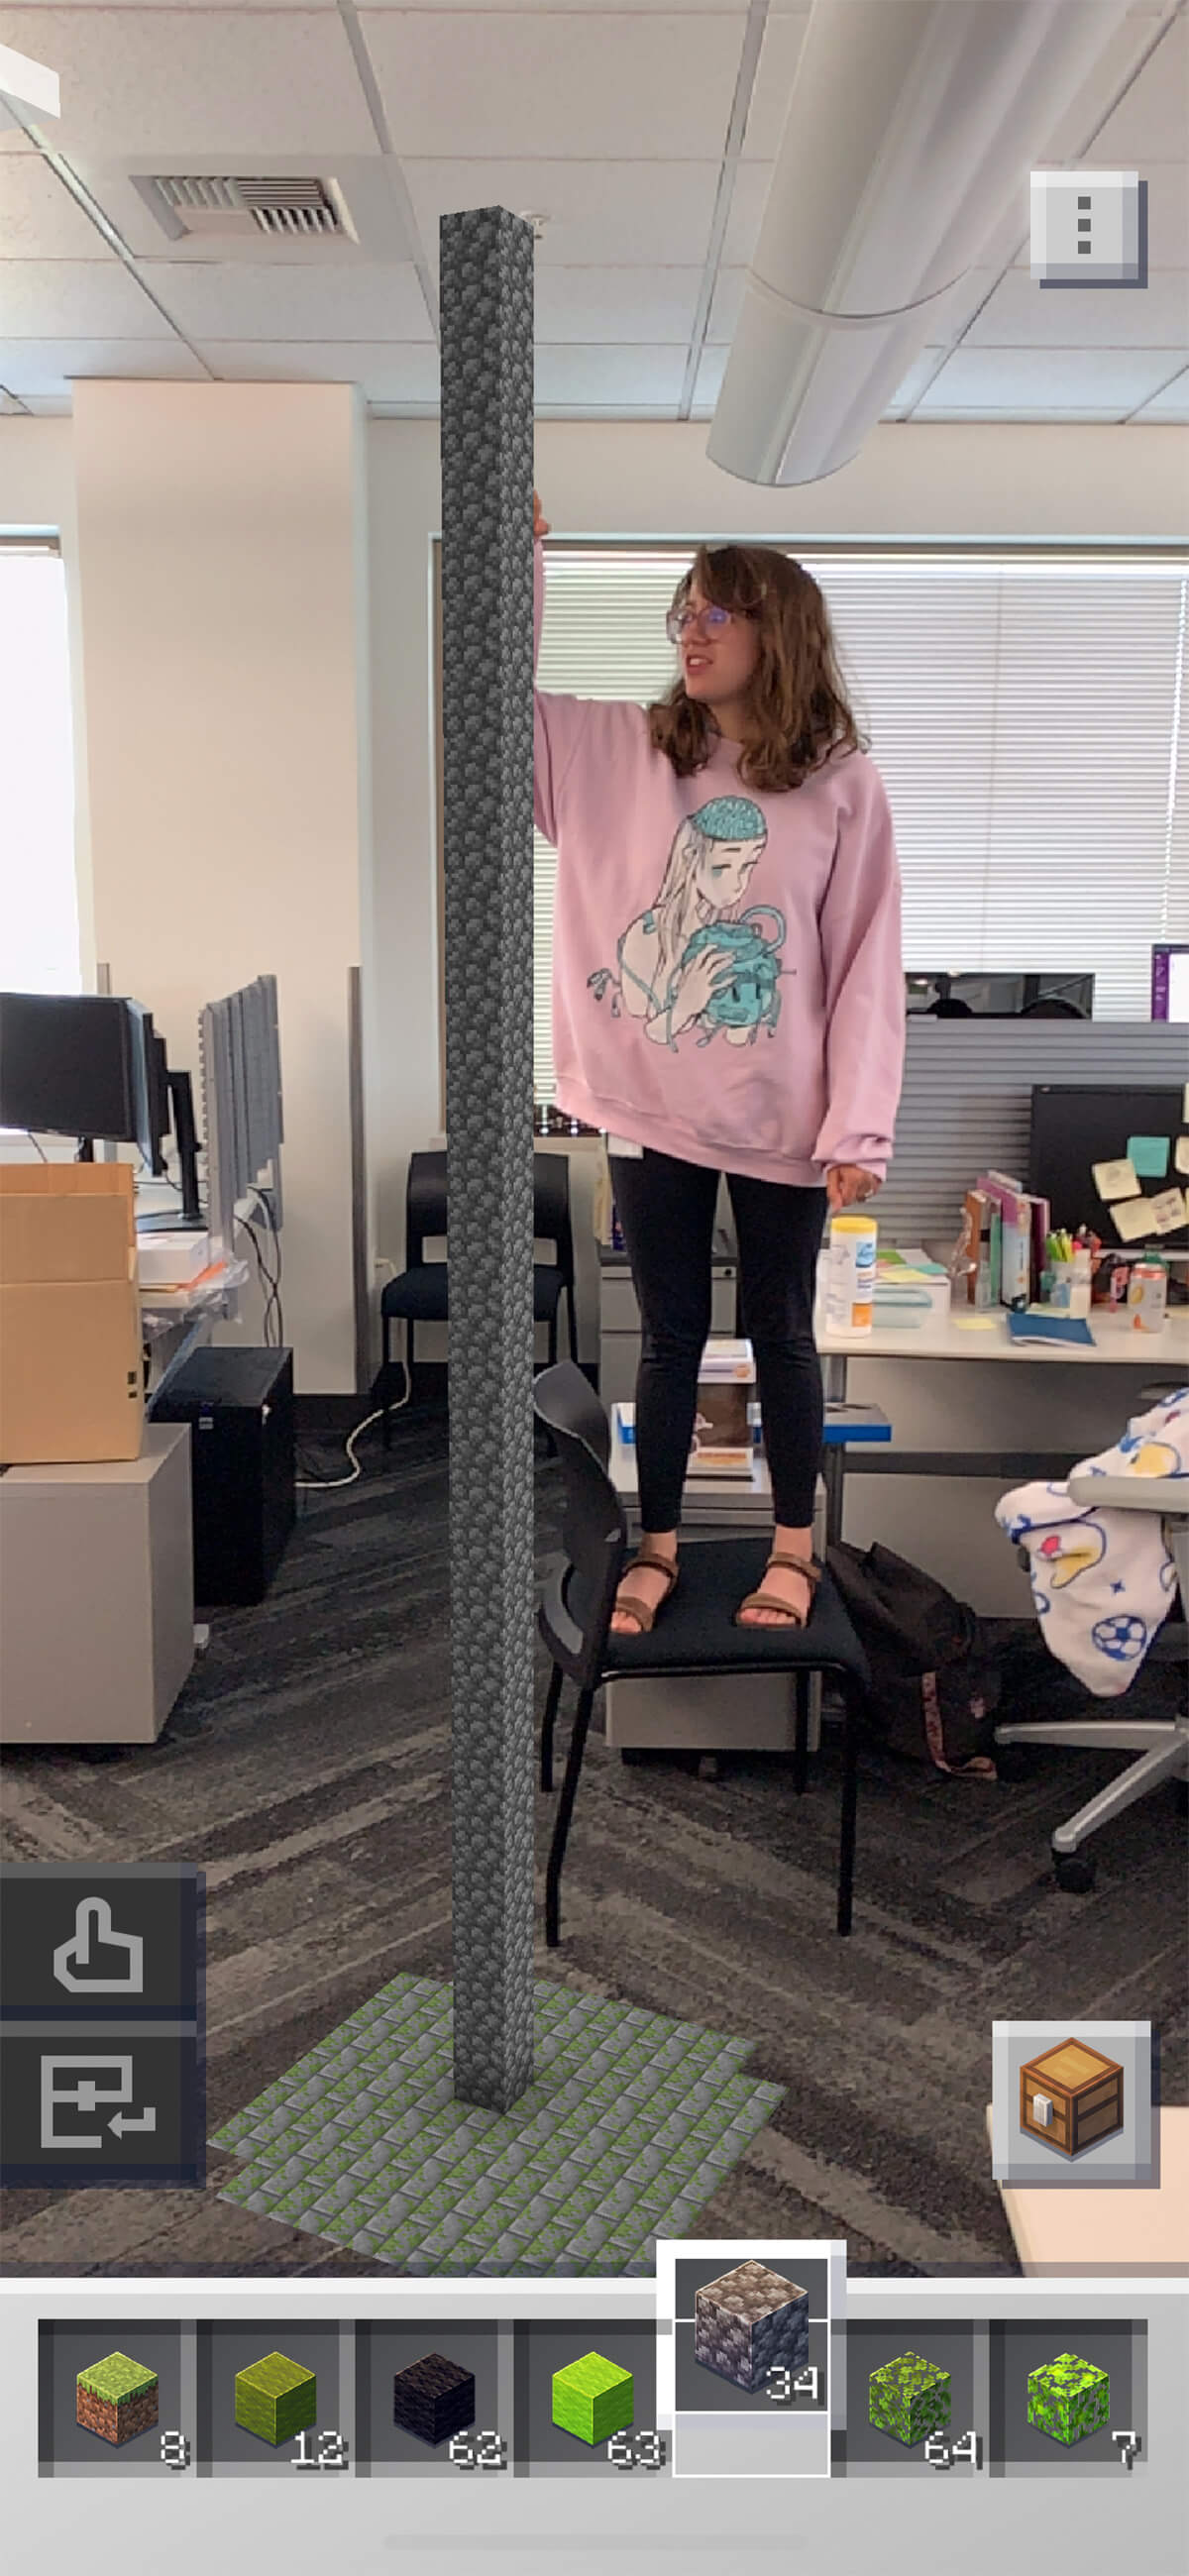 DigiPen graduate and Mojang artist Kelly Greene stands on a chair in her office next to a tall augmented reality Minecraft Earth structure